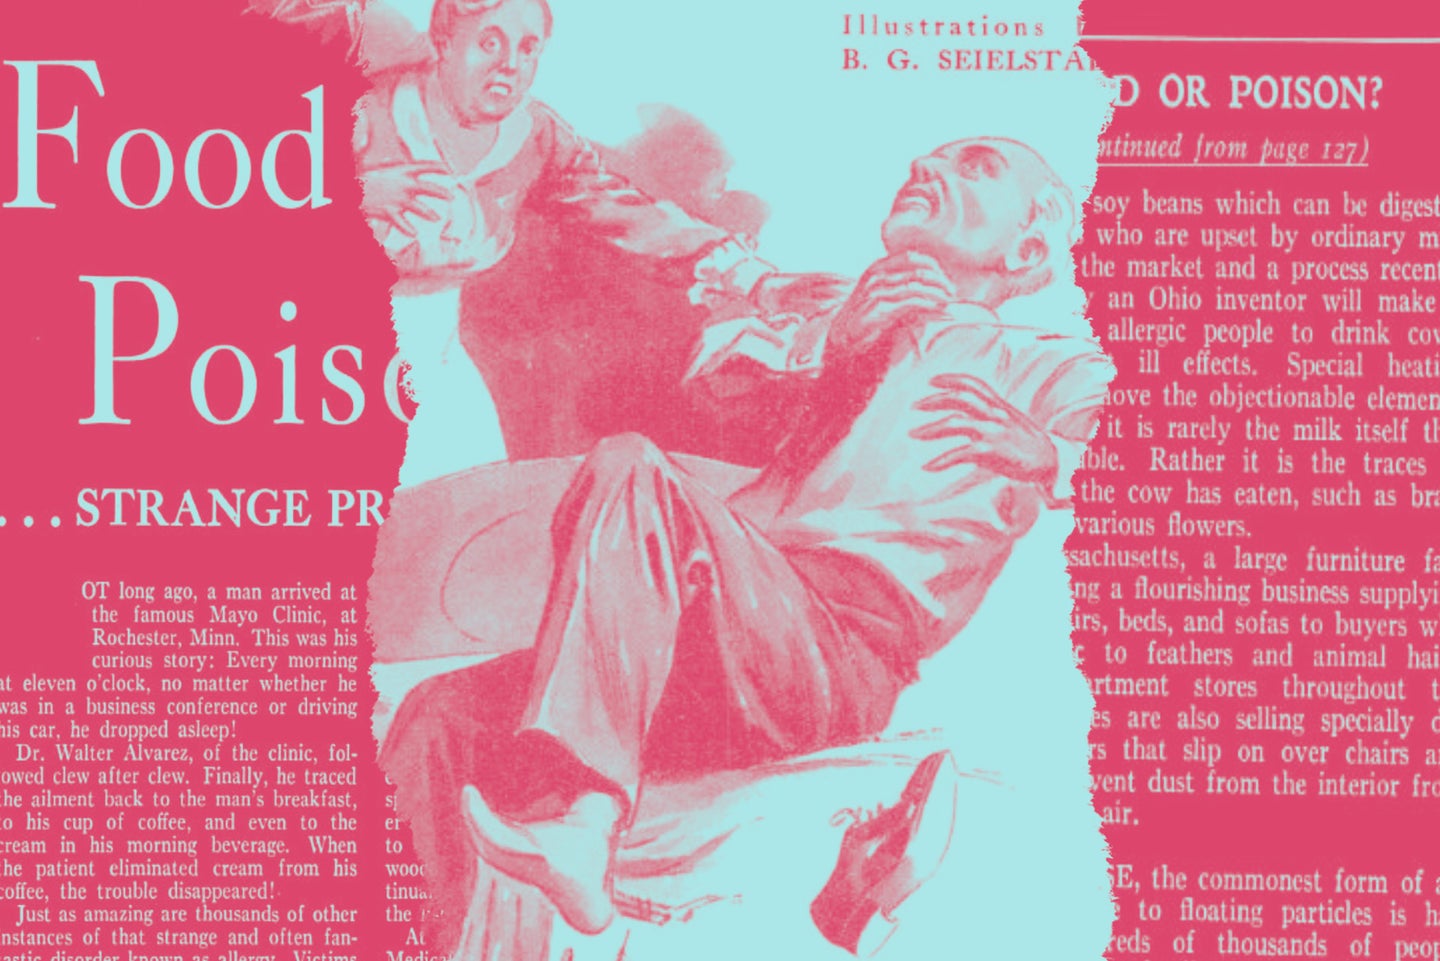 A collage of images from the Popular Science article “Food or Poison? … Strange Pranks of a Medical Mystery” (Frederic Damrau, M.D., November 1936)